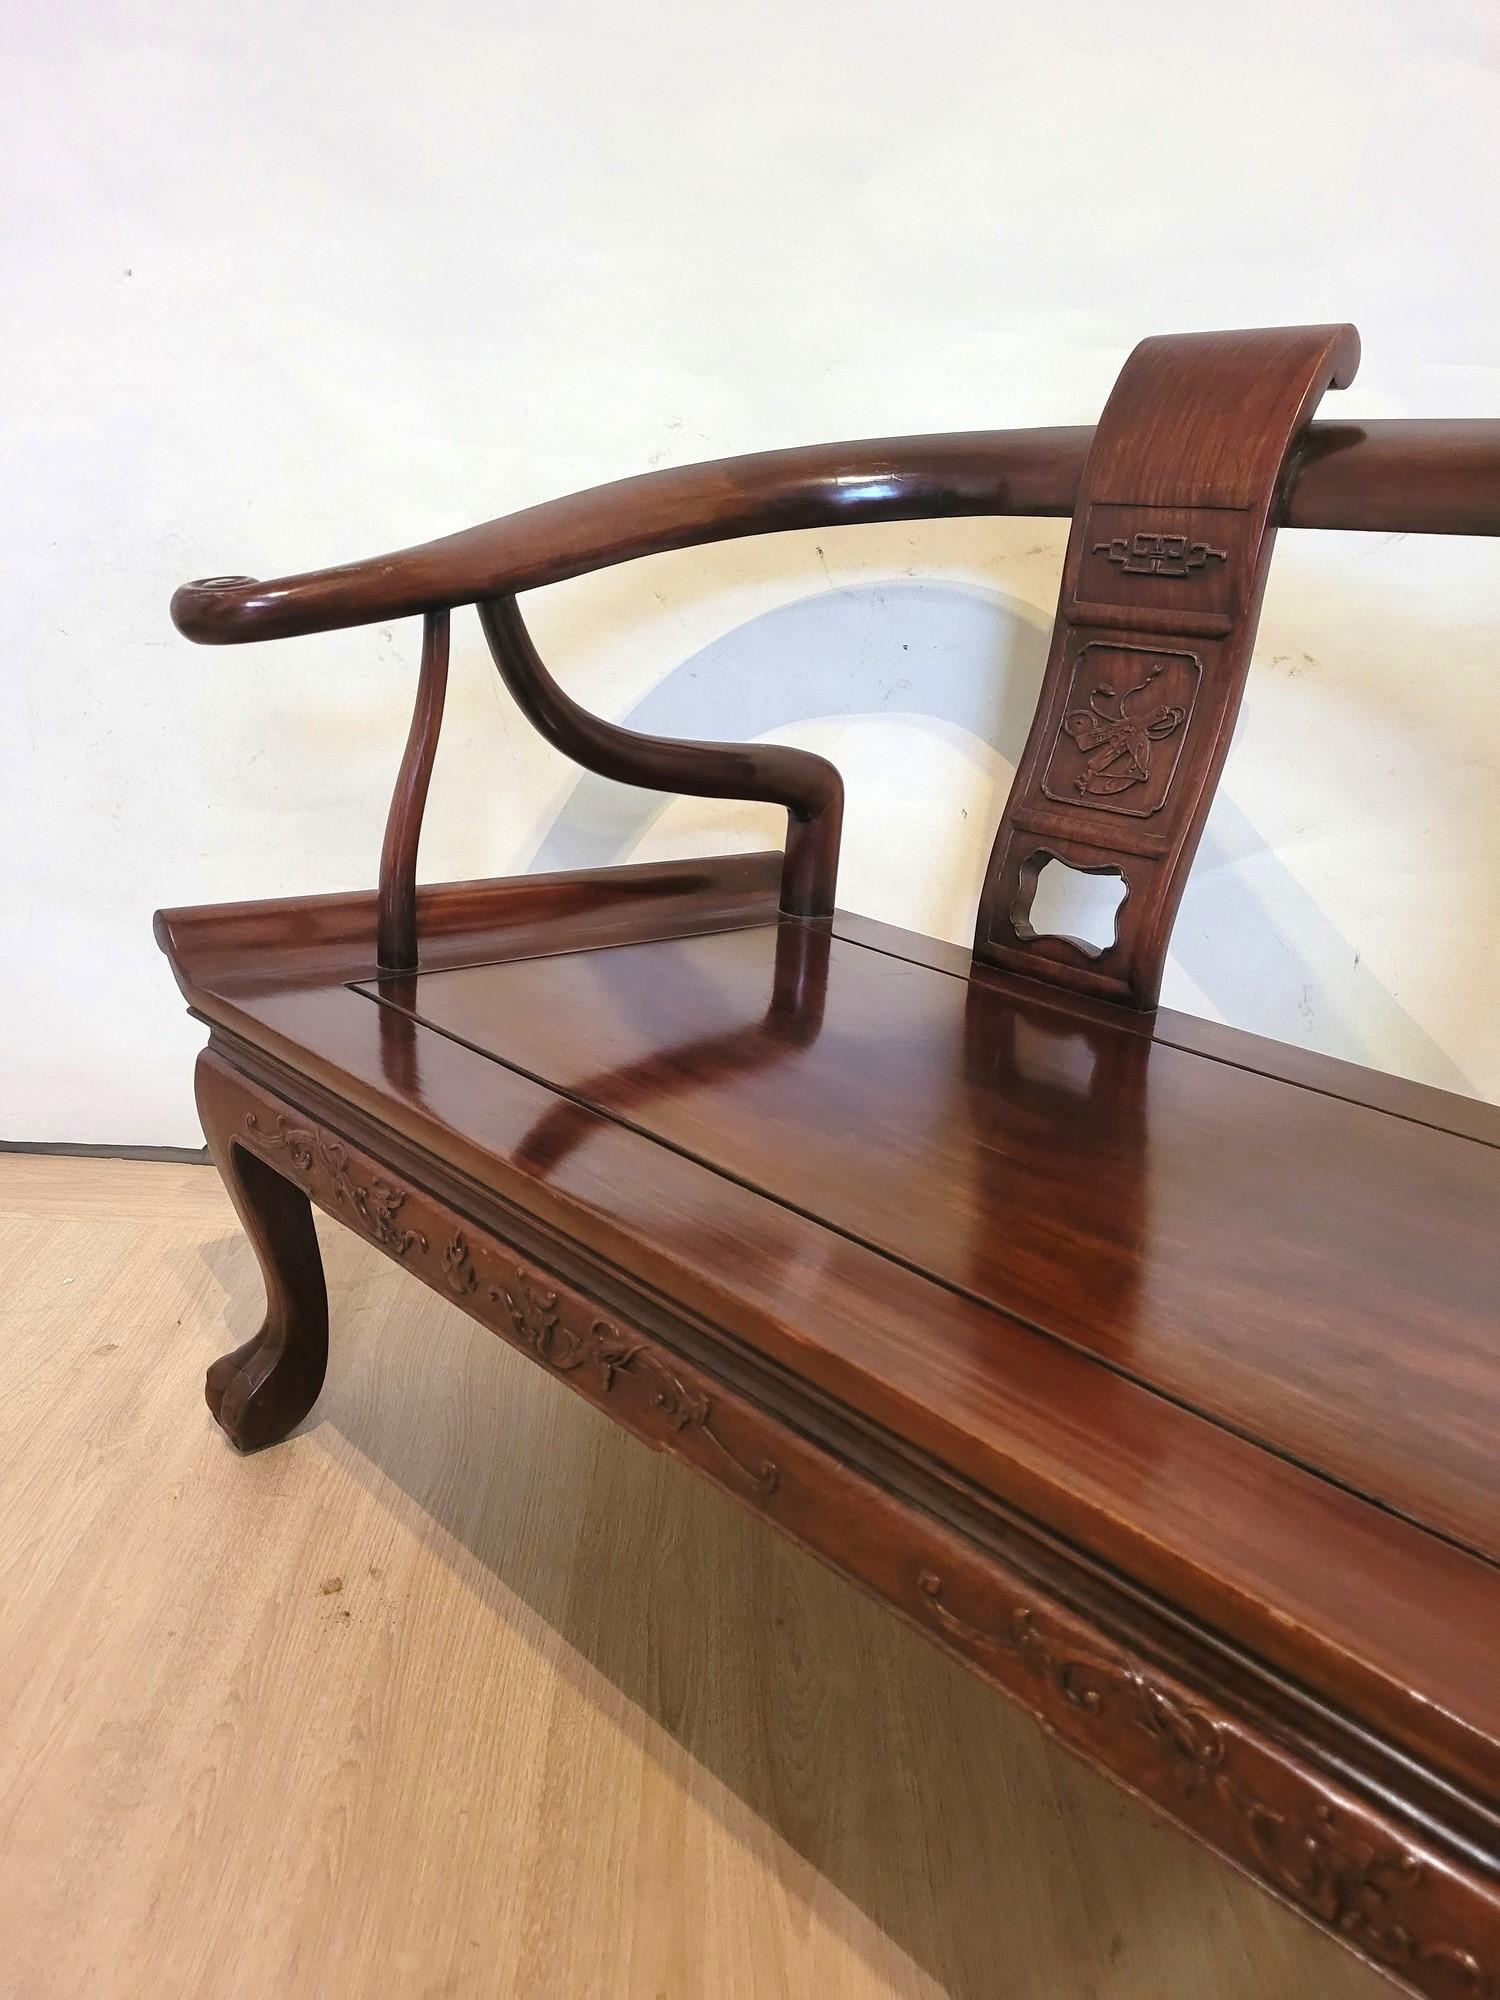 Chinese Carved Wood Bench, Late 19th Early 20th Century For Sale 3